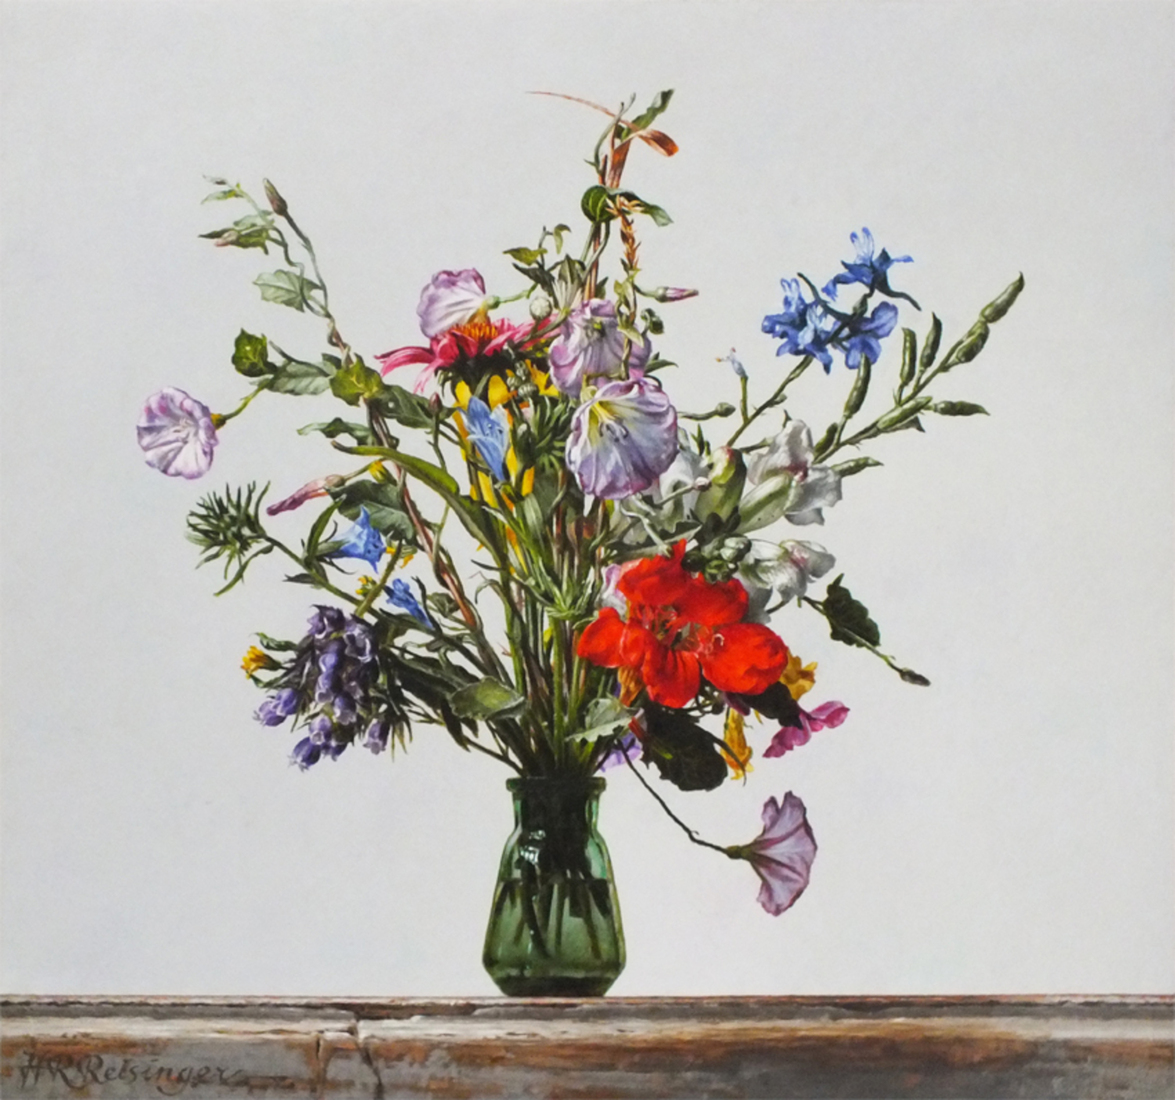 Still life with wild flowers - September